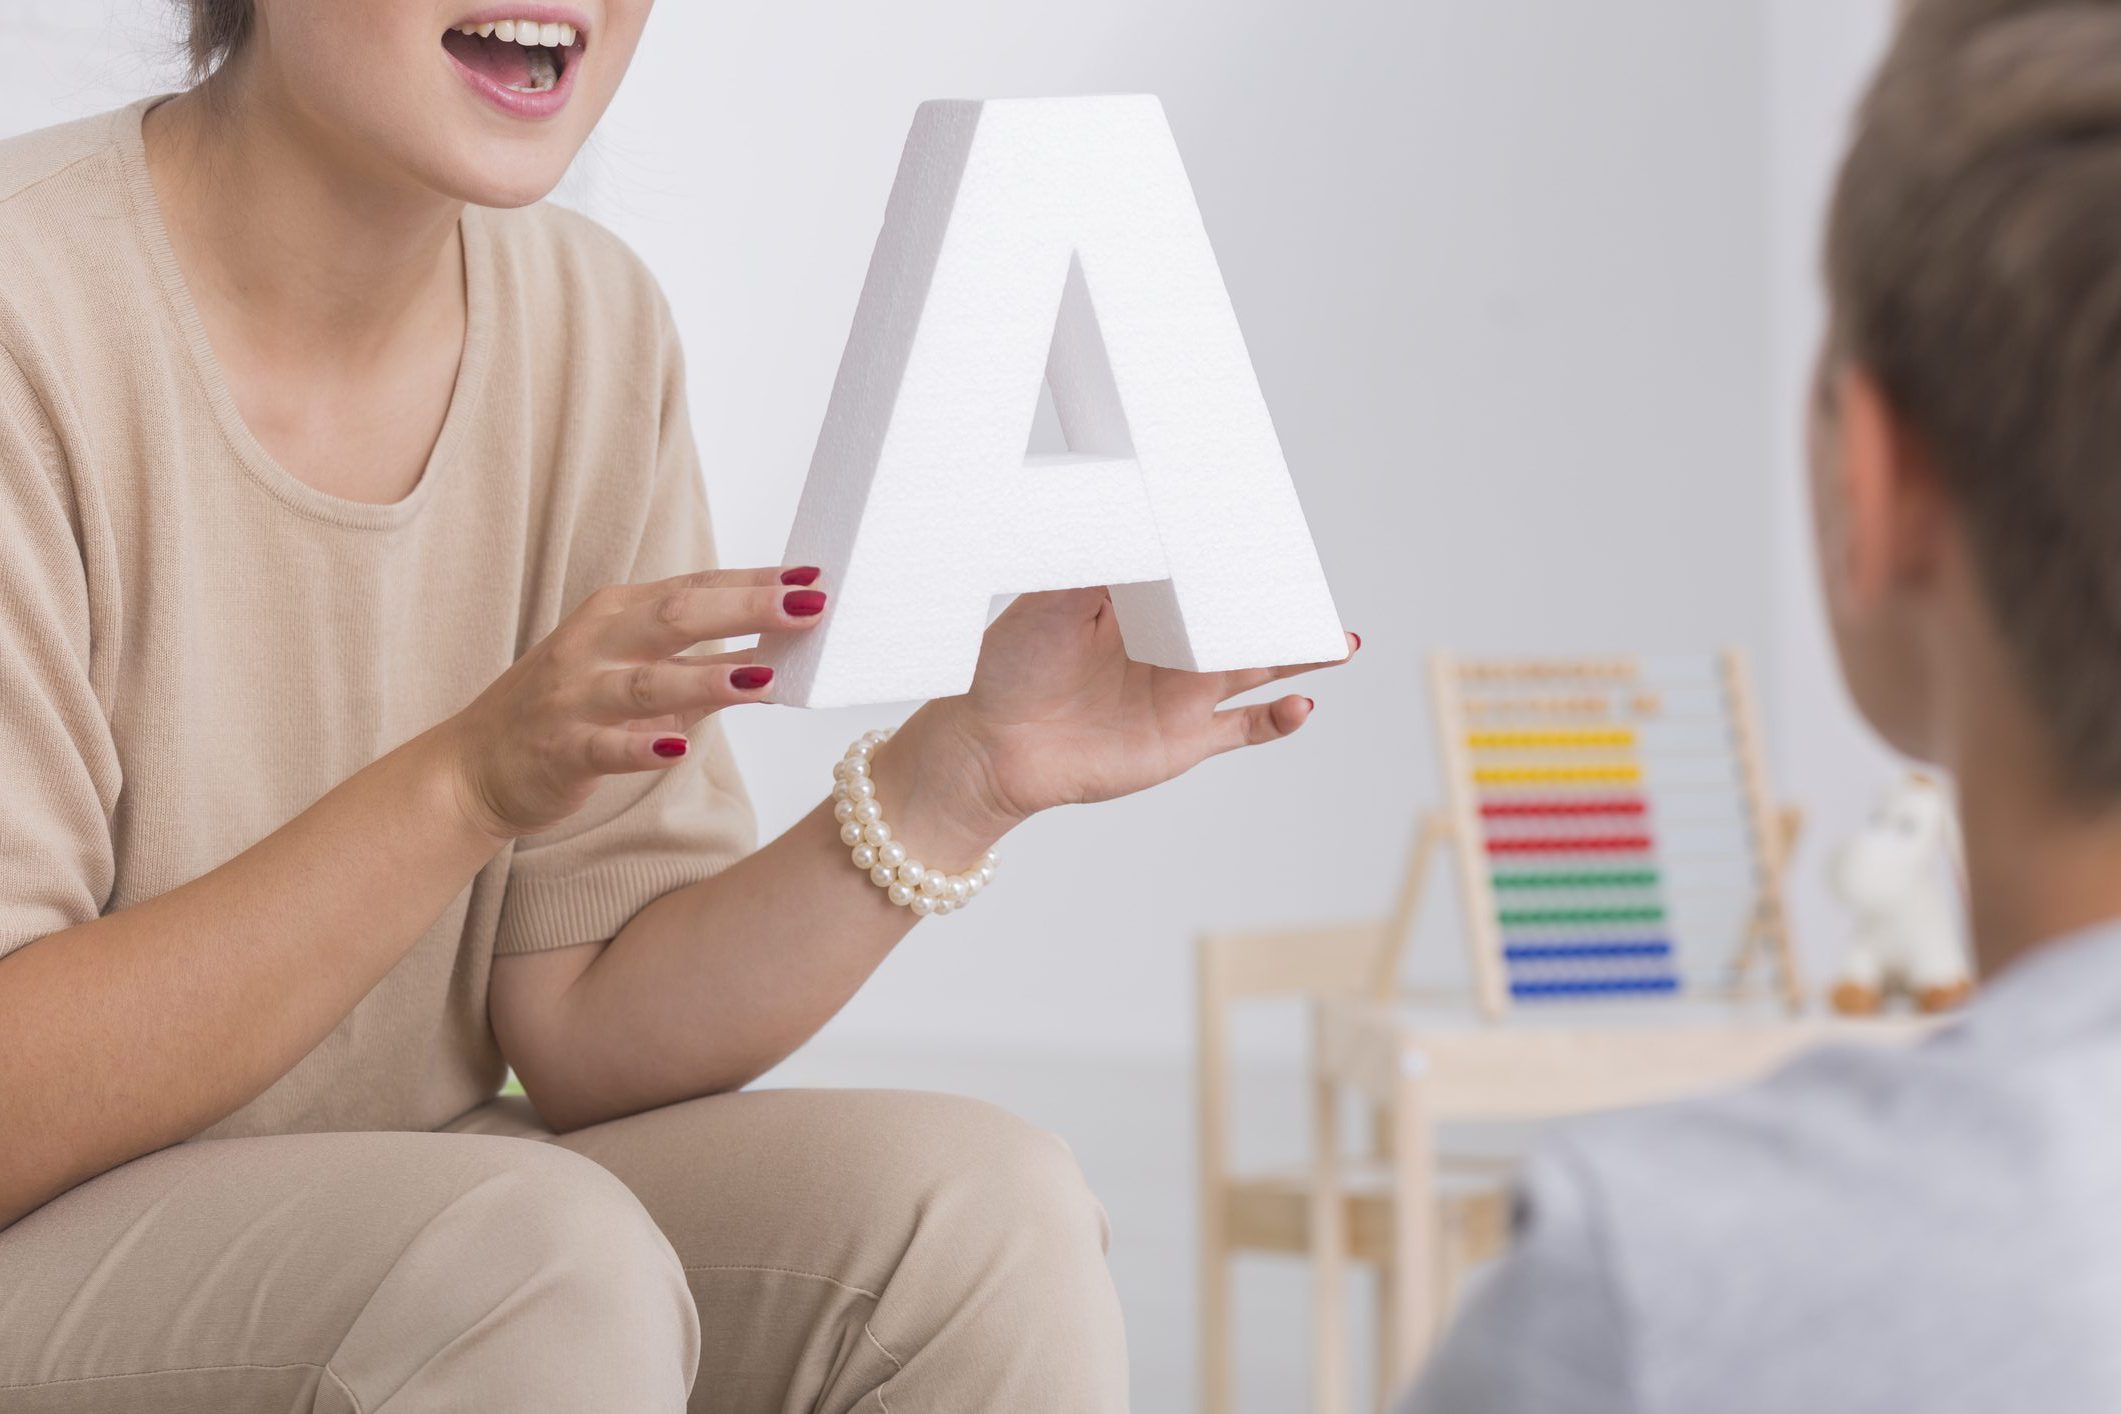 Speech therapist in beige costume holds letter A and speaks to kid during class session.